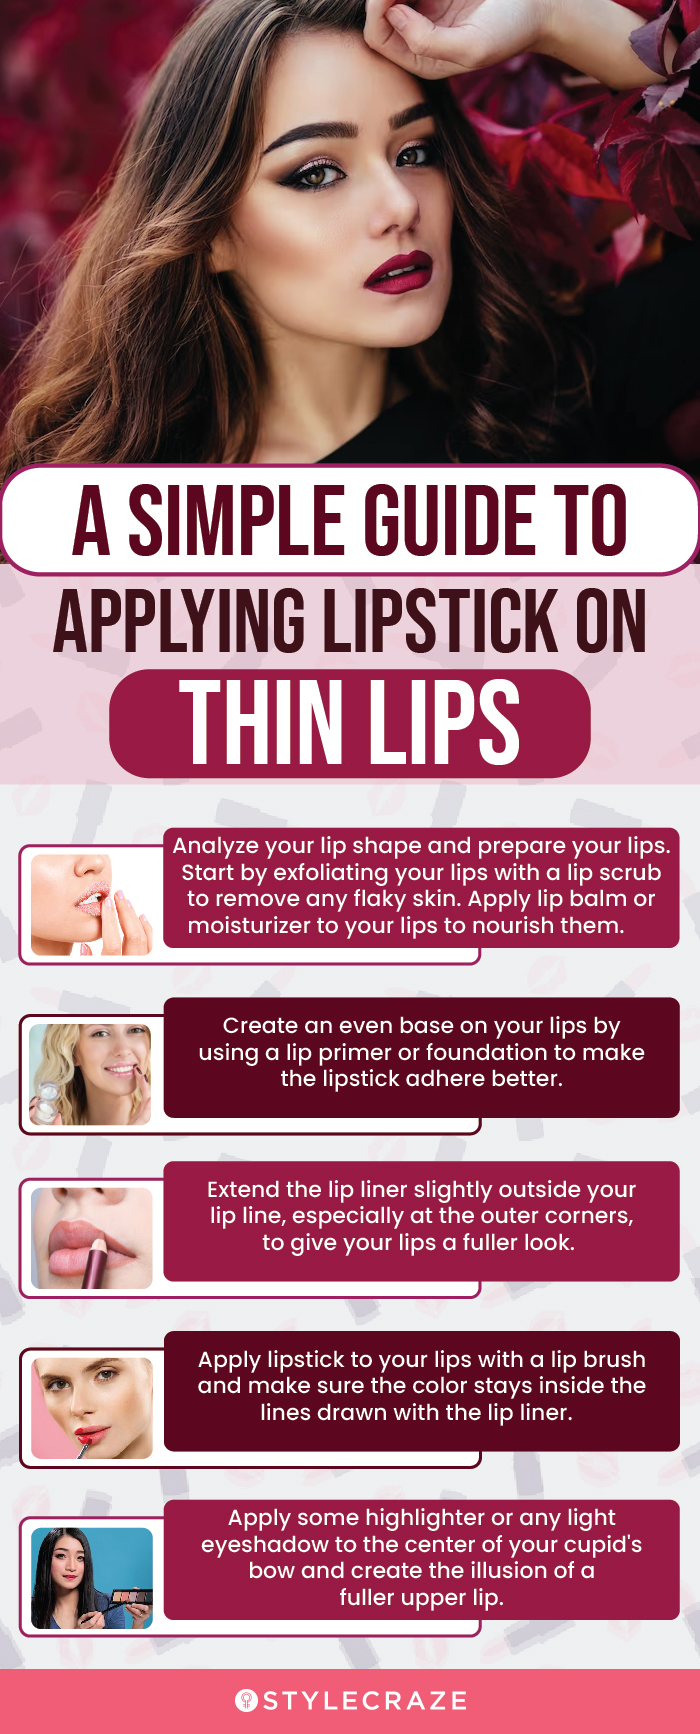 How To Use Foundation To Minimize The Shape Of Your Cupid's Bow